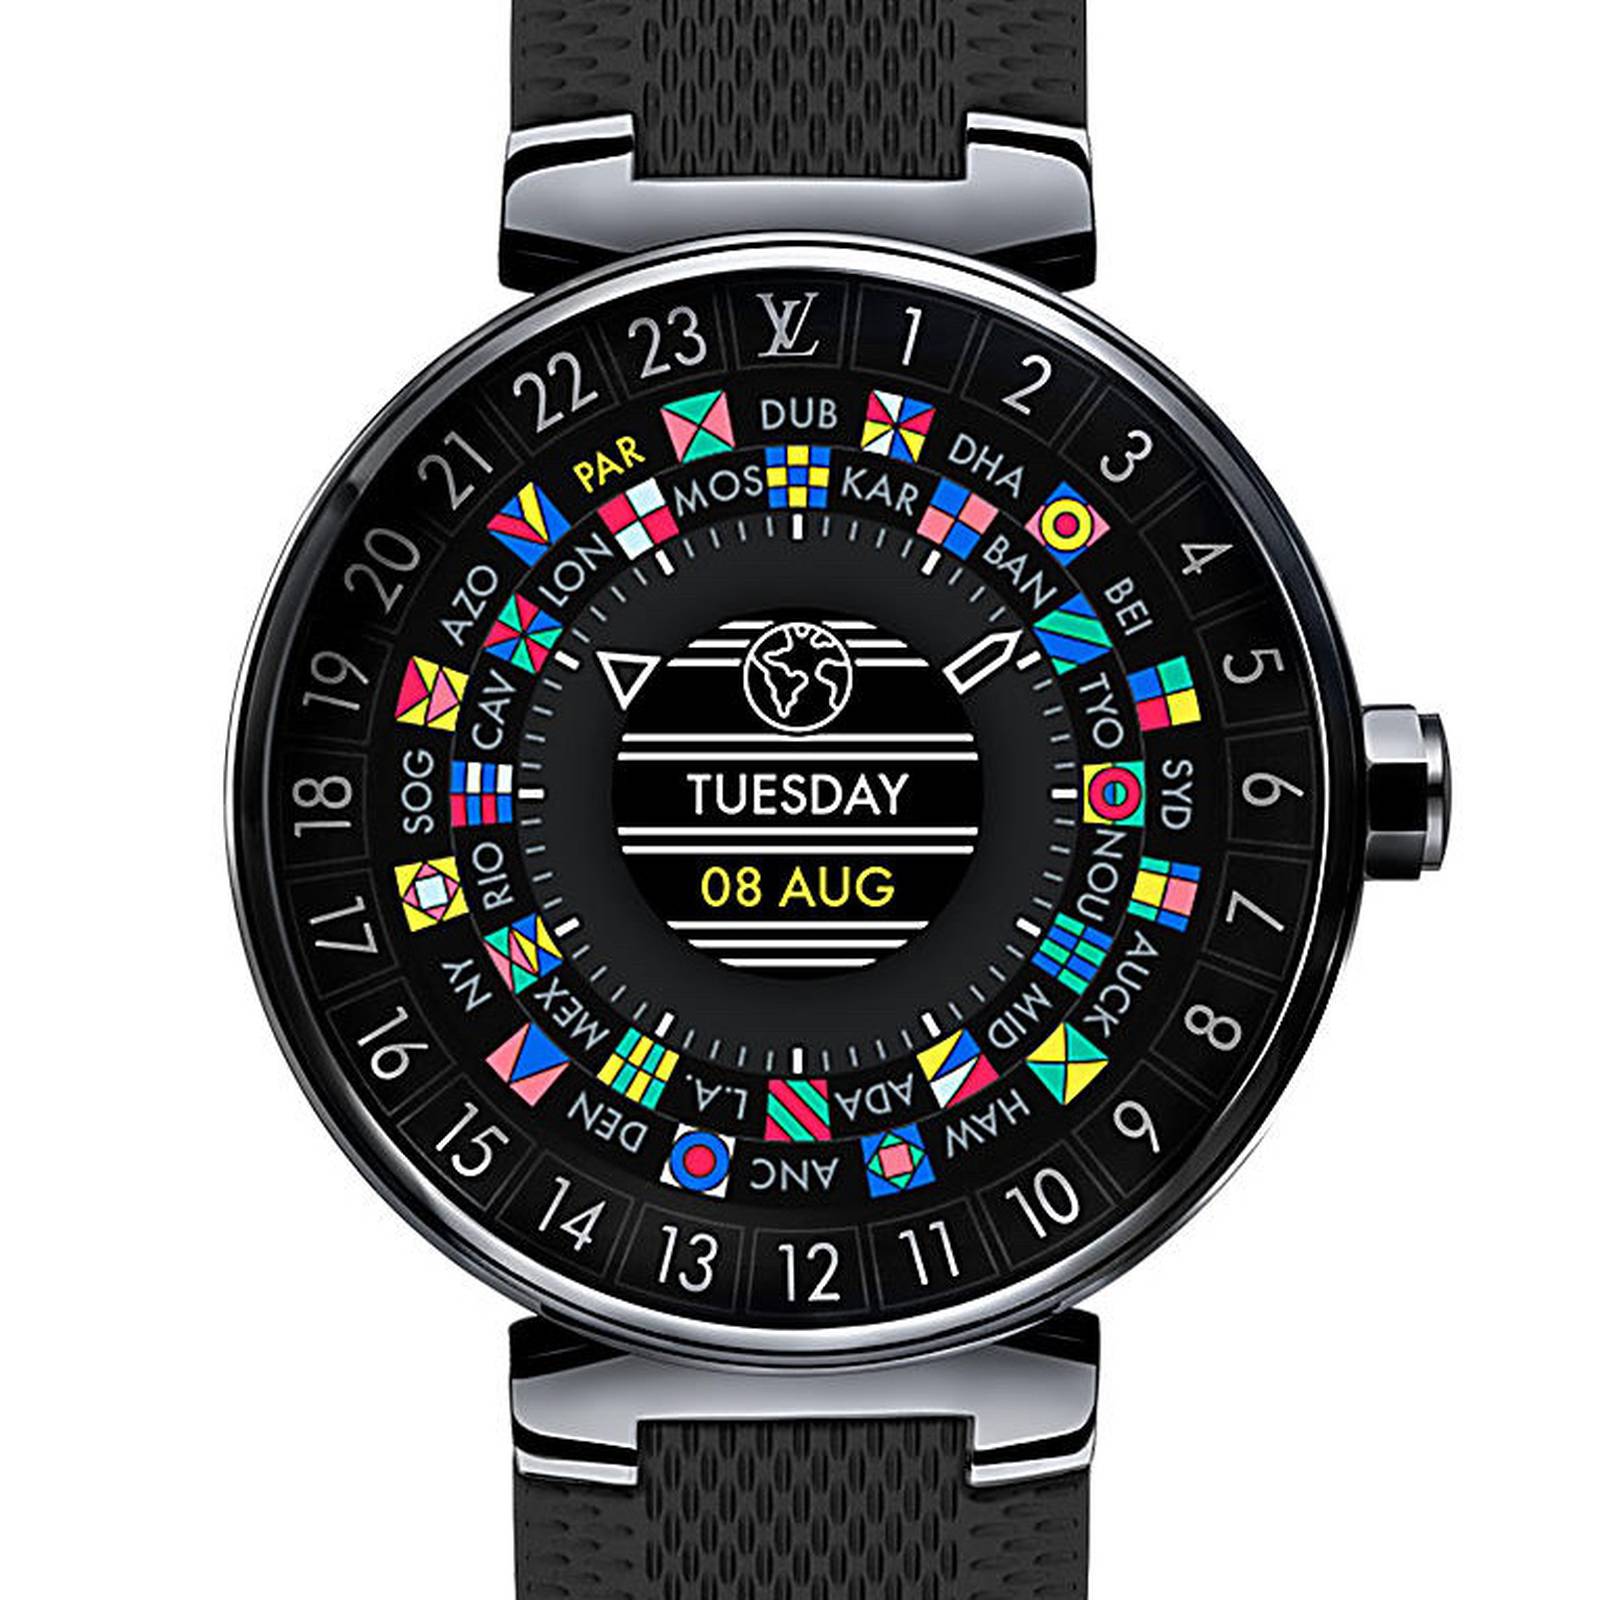 Louis Vuitton smartwatch: The luxury label's new watch makes